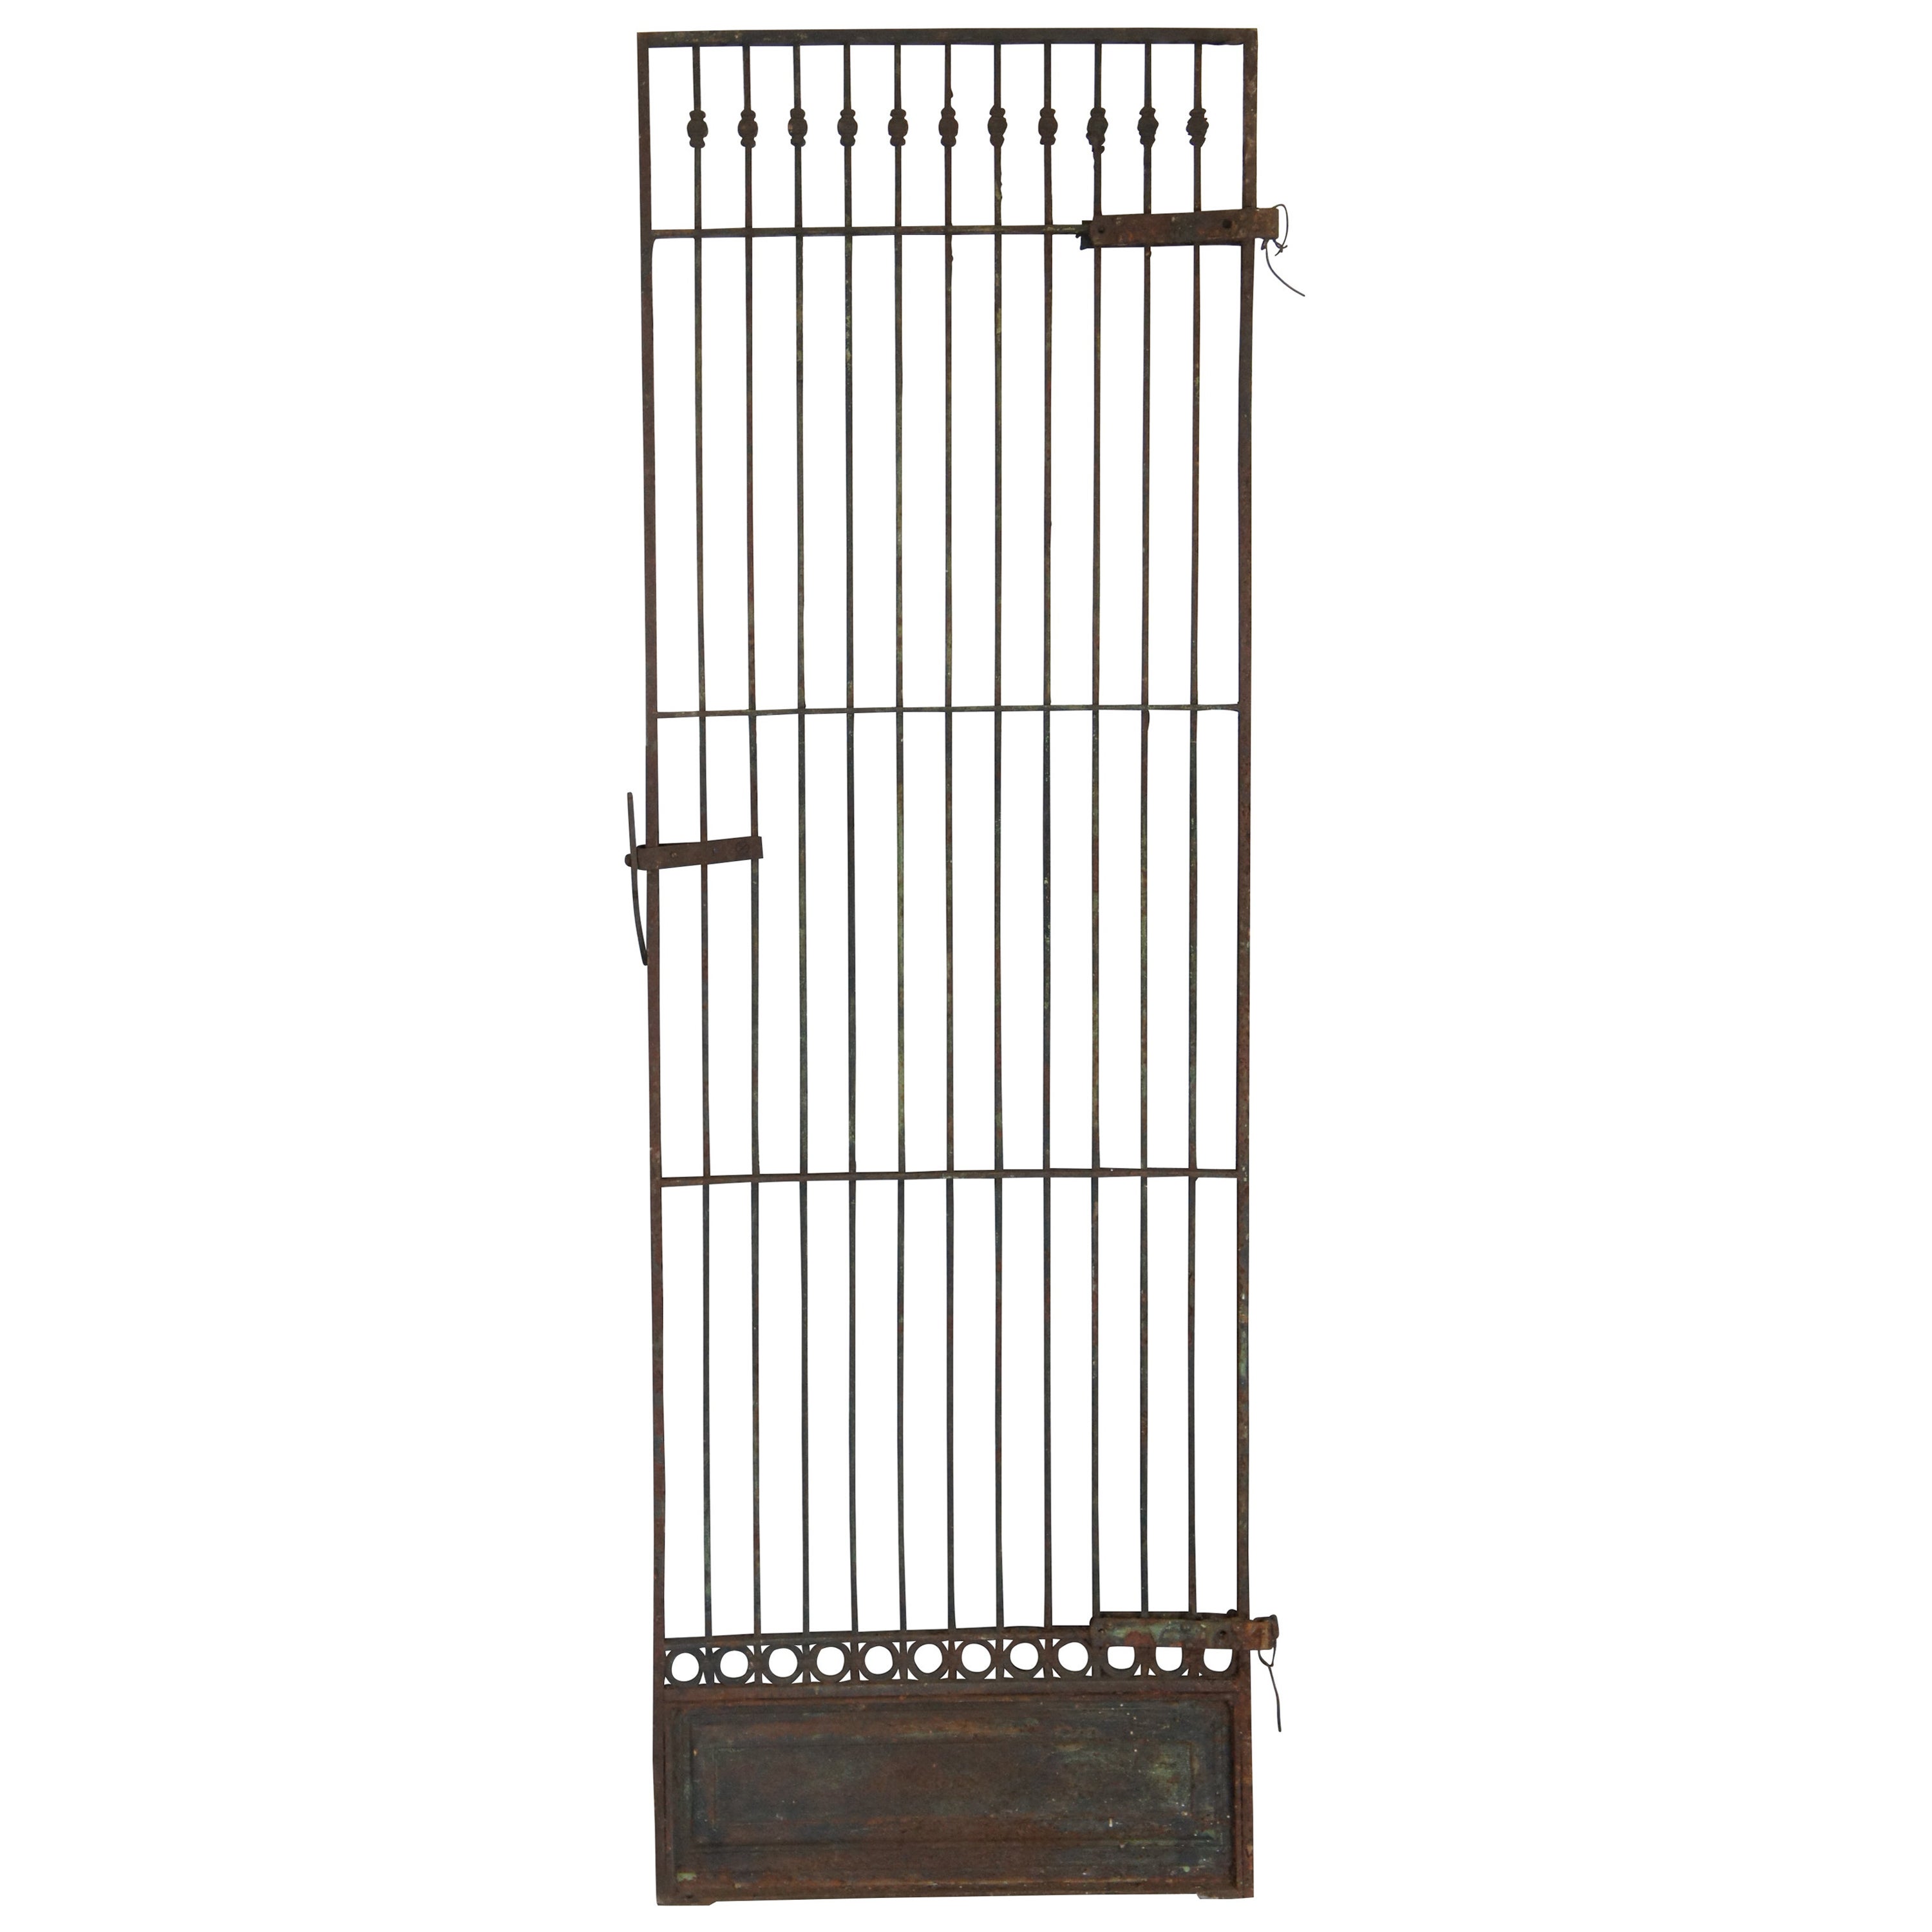 Antique 19th Century Reclaimed Iron Garden Fence Grate Door Panel Wall Gate 83" For Sale